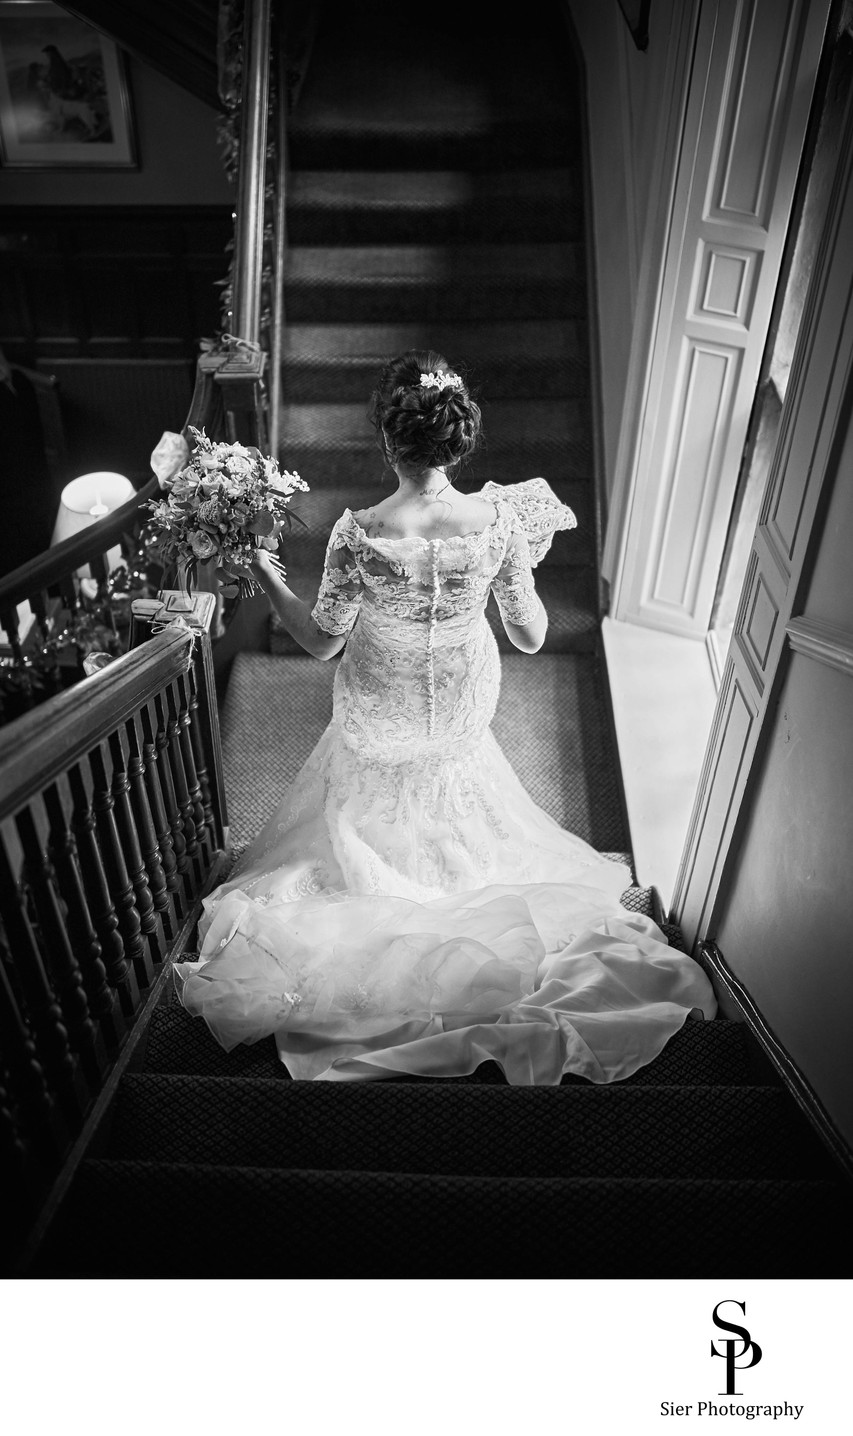 Whitley Hall Hotel Staircase Wedding Photo